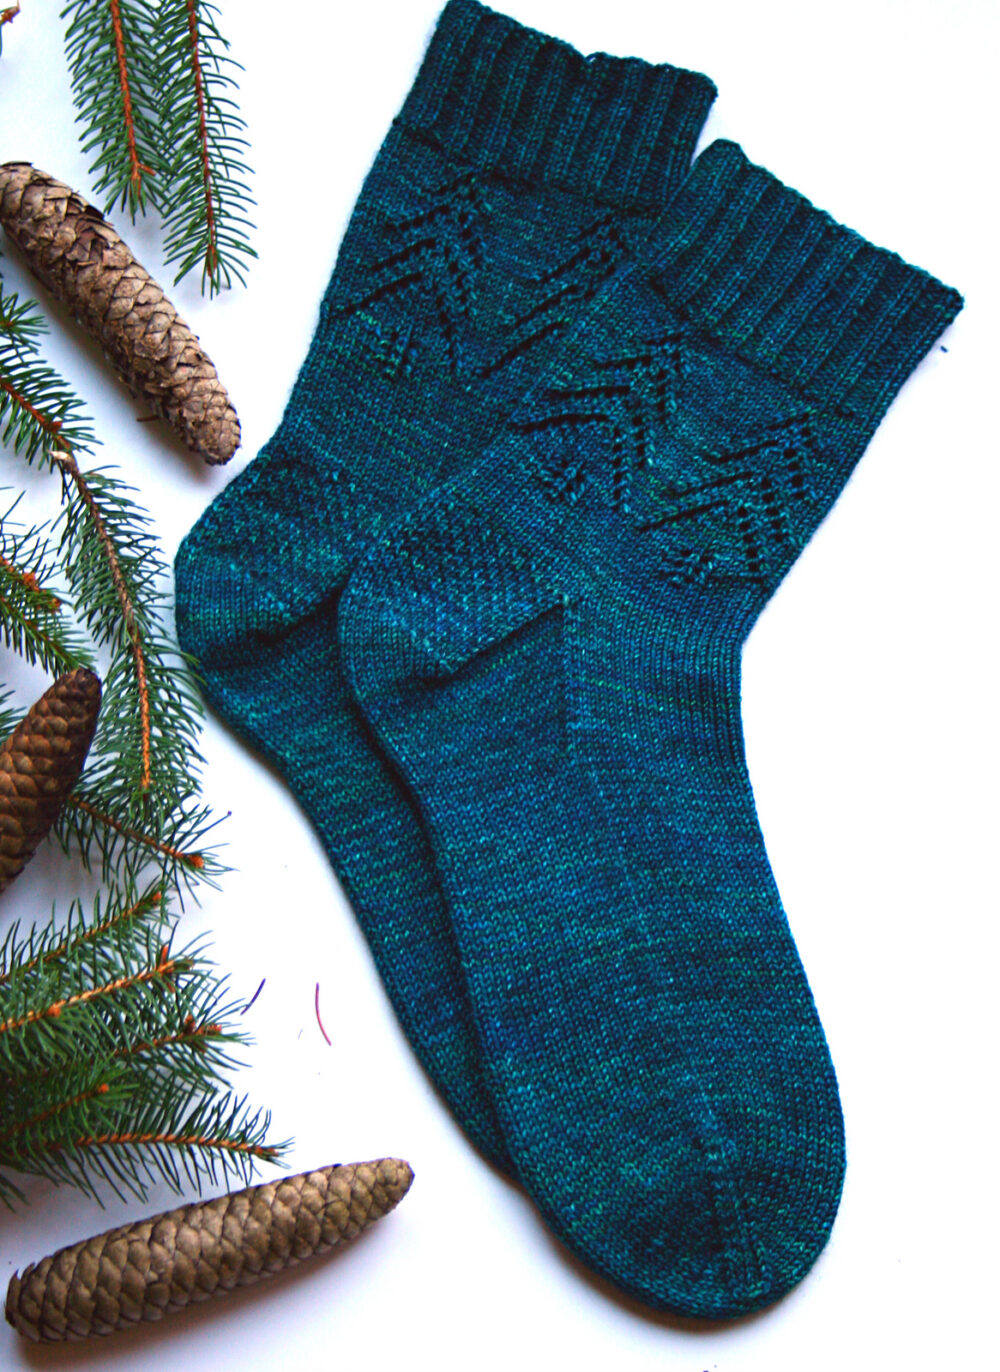 20 Cozy Holiday Inspired Knitting & Crochet Projects